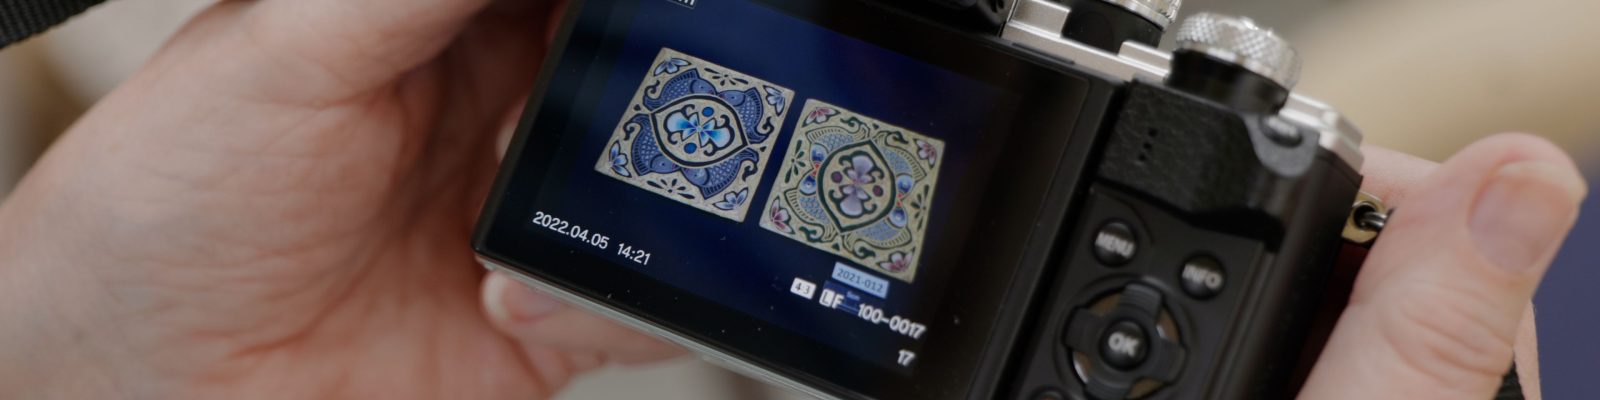 Digital camera being held up to show two embroideries on the screen